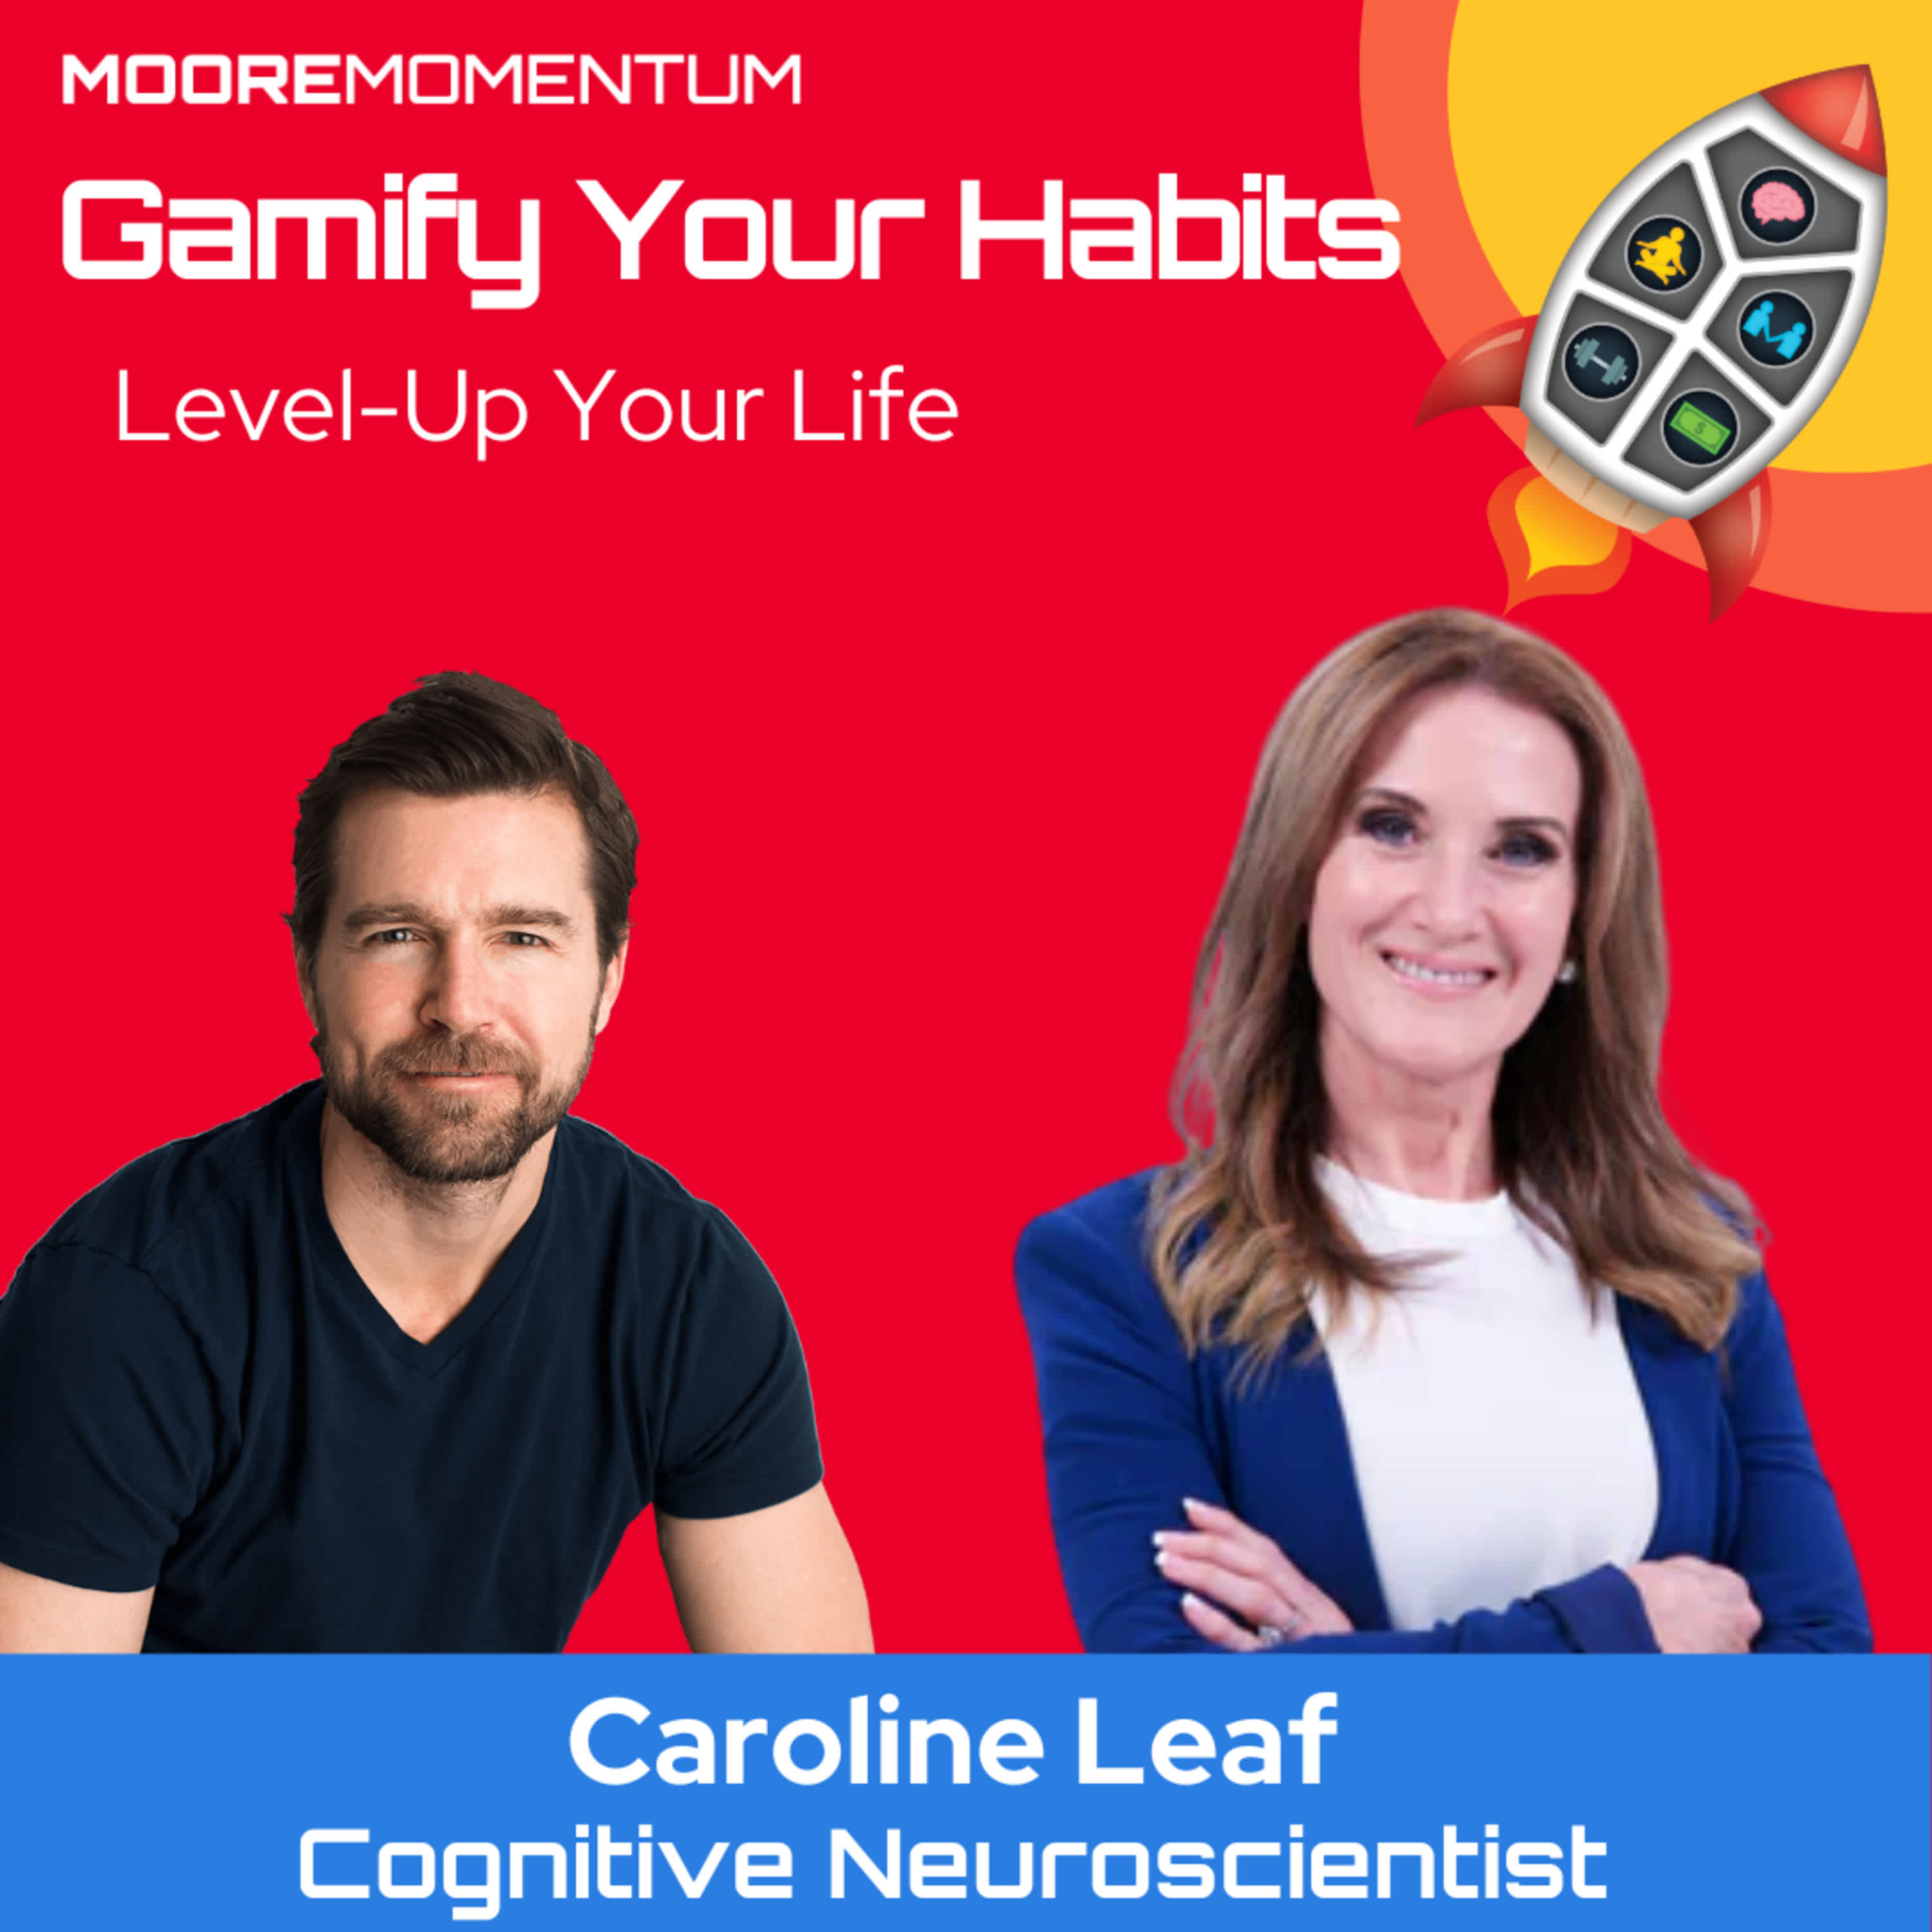  In this episode of Gamify Your Habits, Will digs deep into how our brain grows and is constantly changing with Cognitive Neuroscientist and author of 18 books, Dr. Caroline Leaf. She discussed how deeper thinking equals a longer life and how we are harming ourselves when we don’t grow or challenge ourselves.